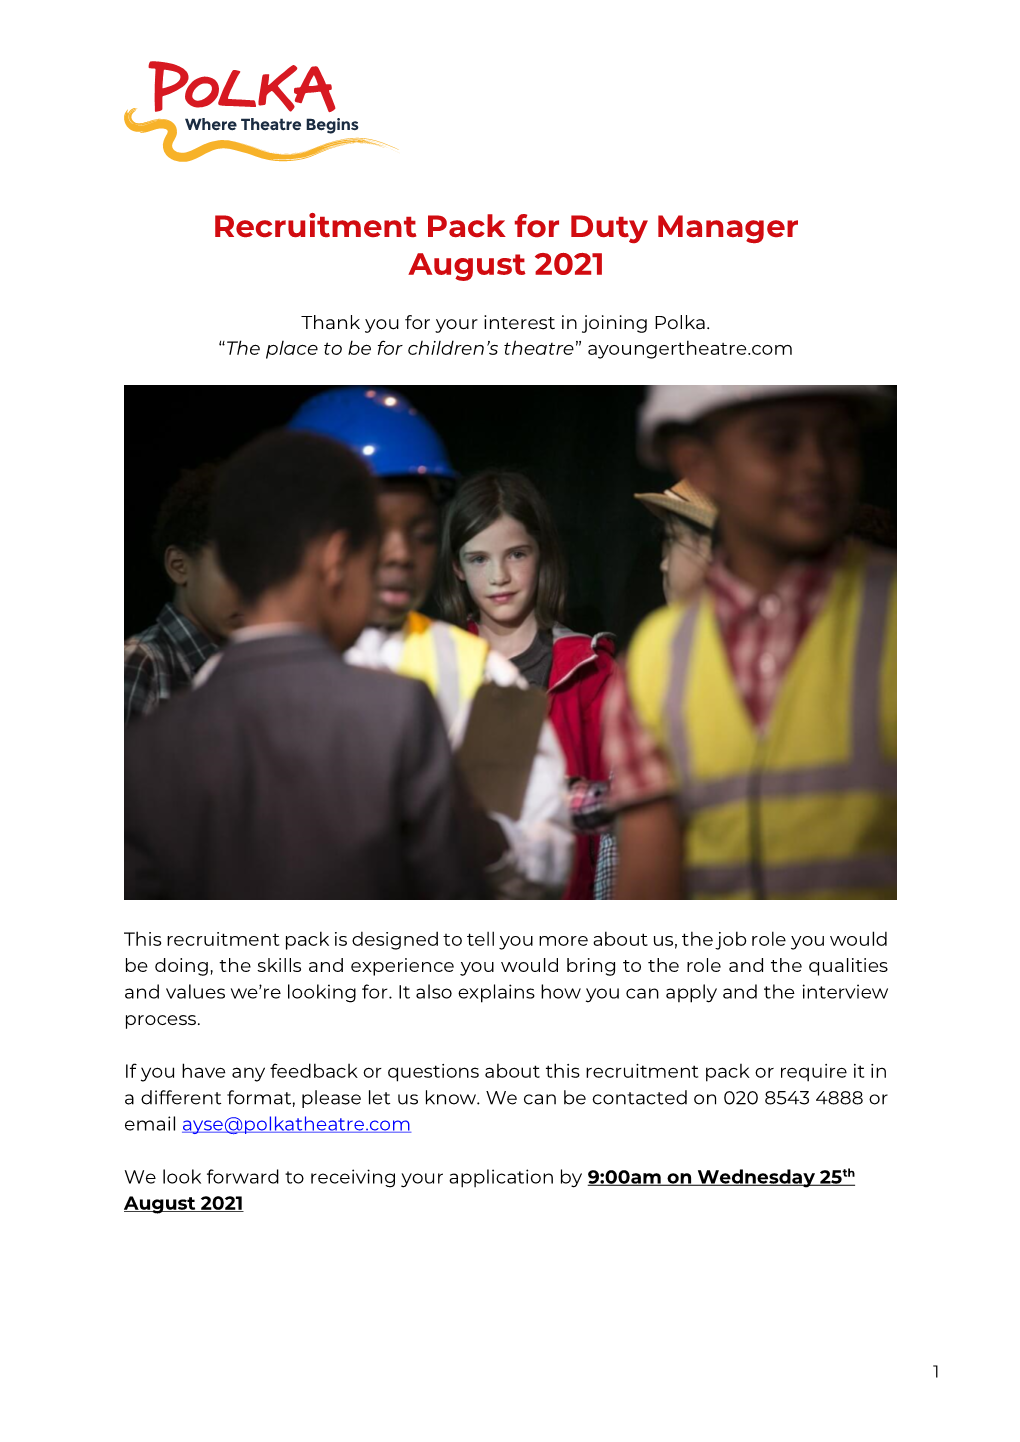 Recruitment Pack for Duty Manager August 2021